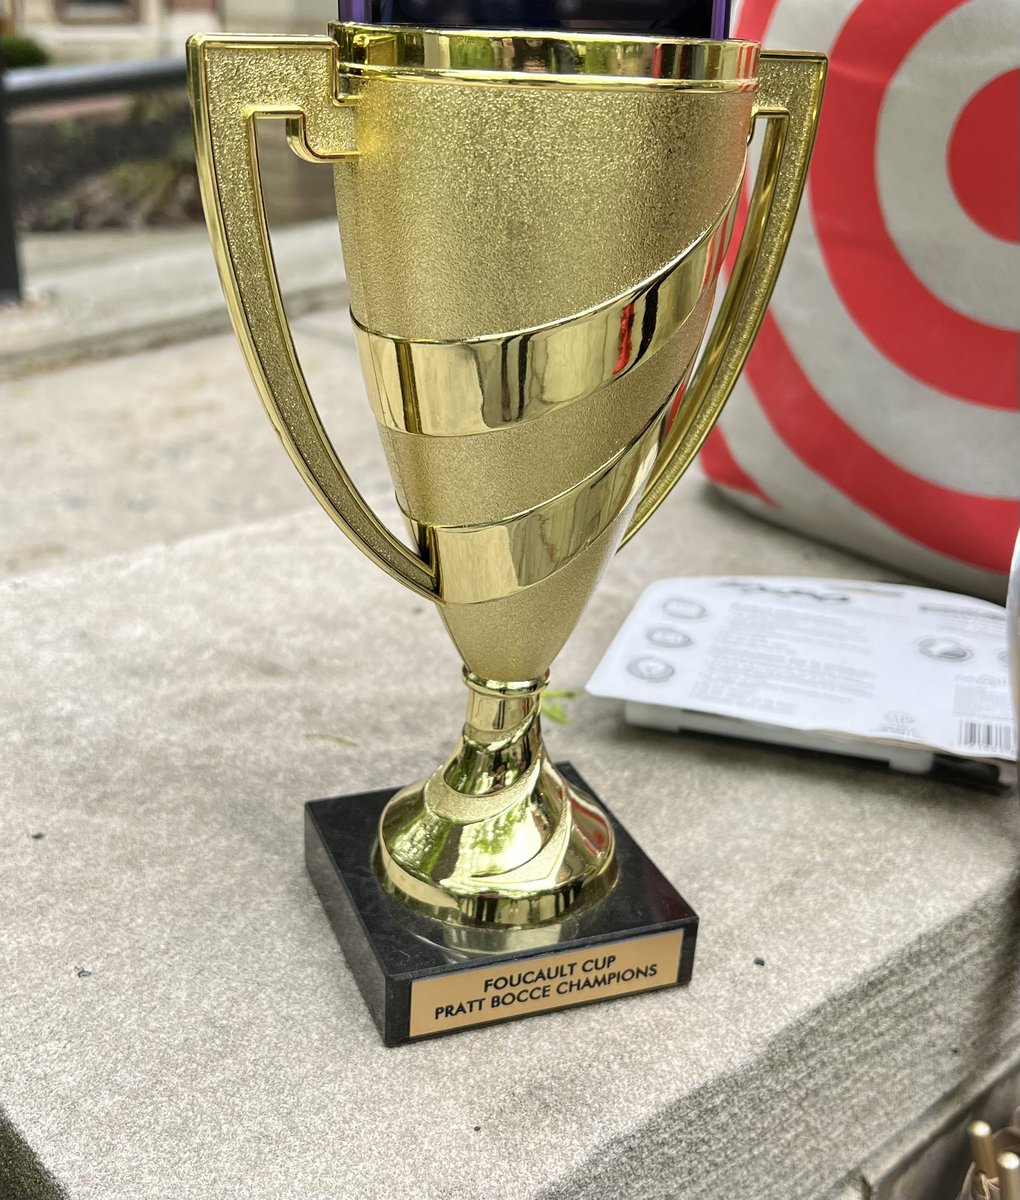 The countdown to the Spring Bocce Tournament has begun! On Friday, May 3rd the faculty from Pratt’s School of Liberal Arts & Sciences will battle for the vaunted Foucault Cup….